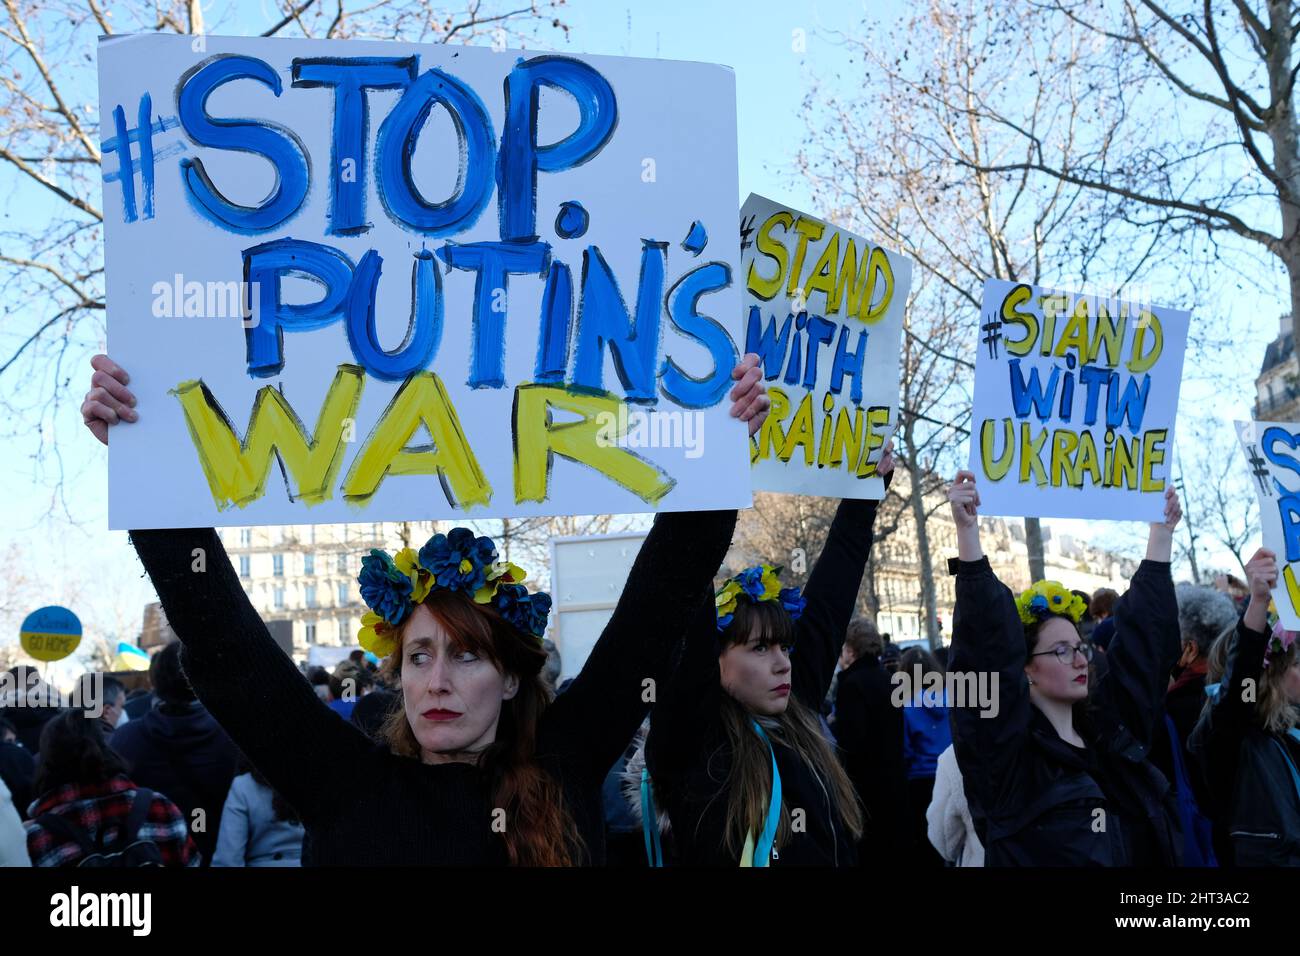 Parisians turned out for this rally against the invasion of Ukraine by Russian President Vladimir Putin's troops. 'stop the war' signs were numerous Stock Photo